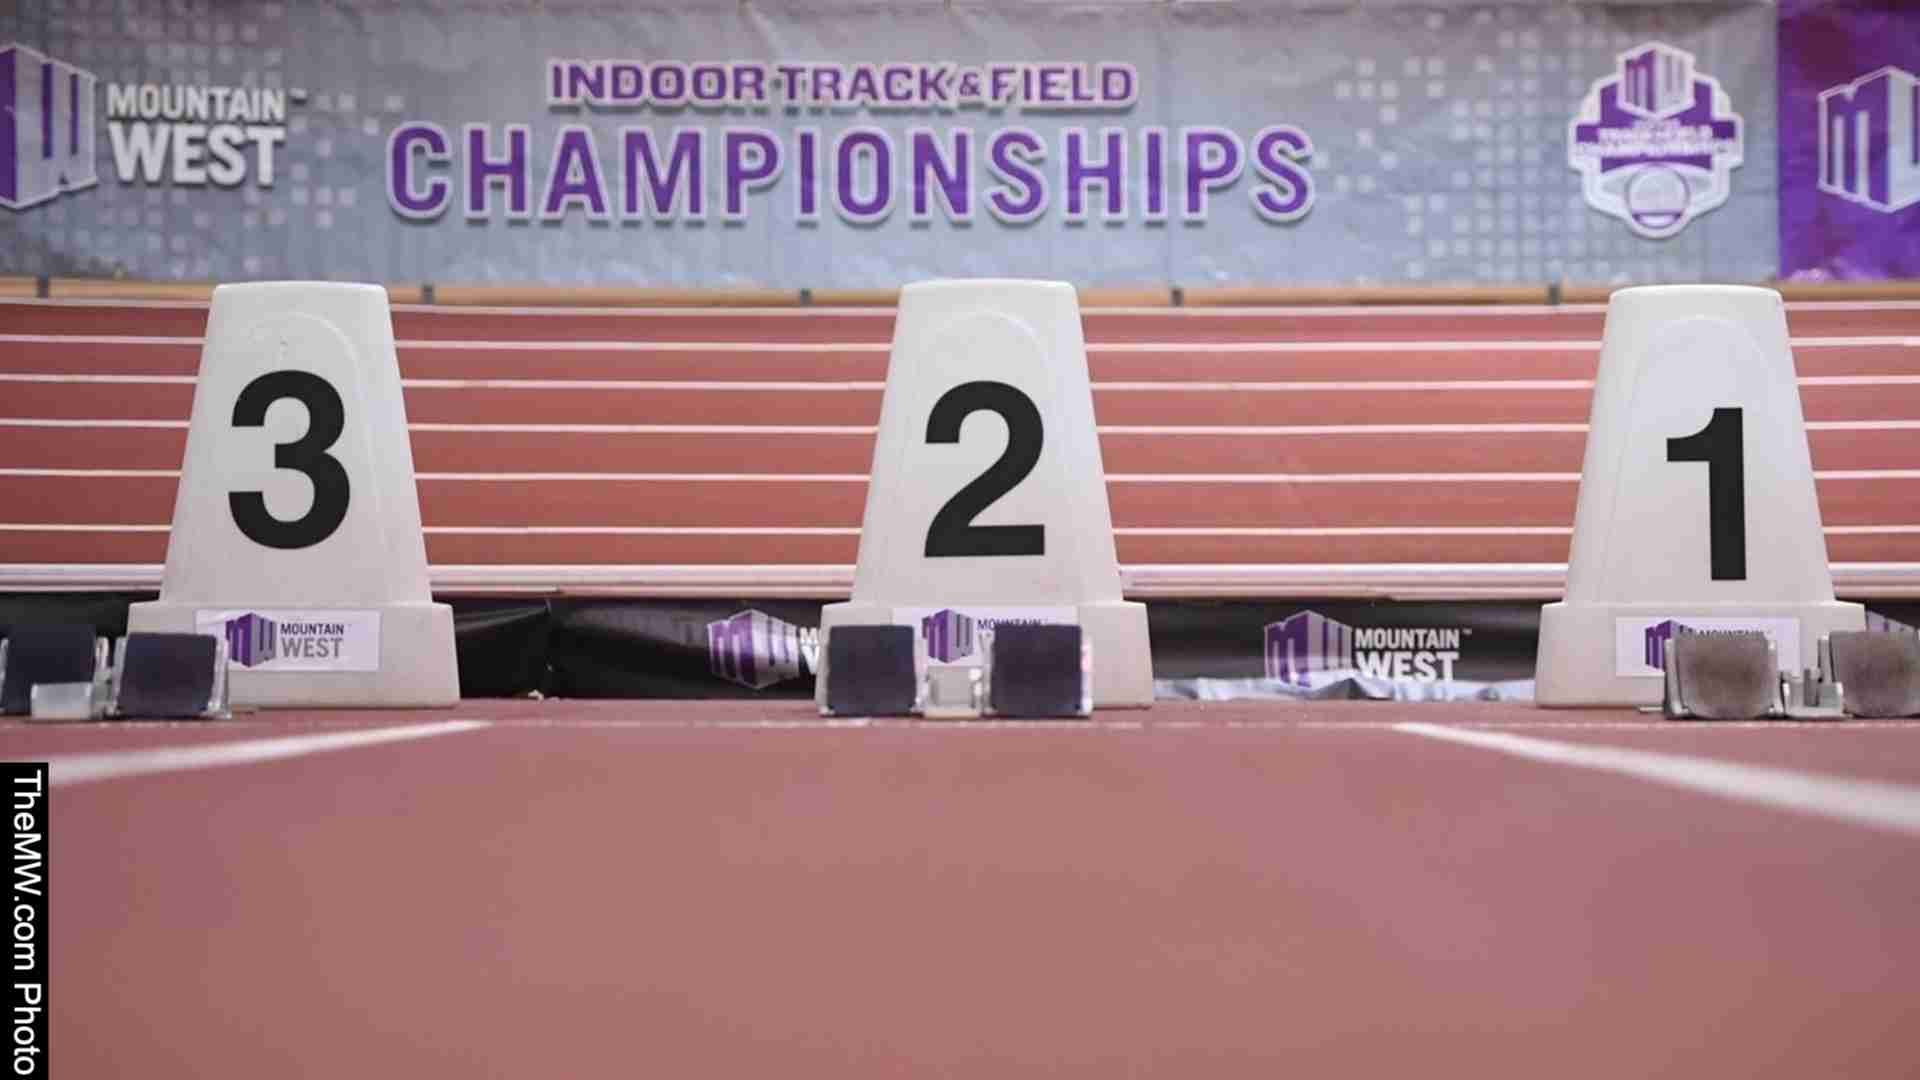 How to watch the 2022 Mountain West Indoor Track & Field Championships?